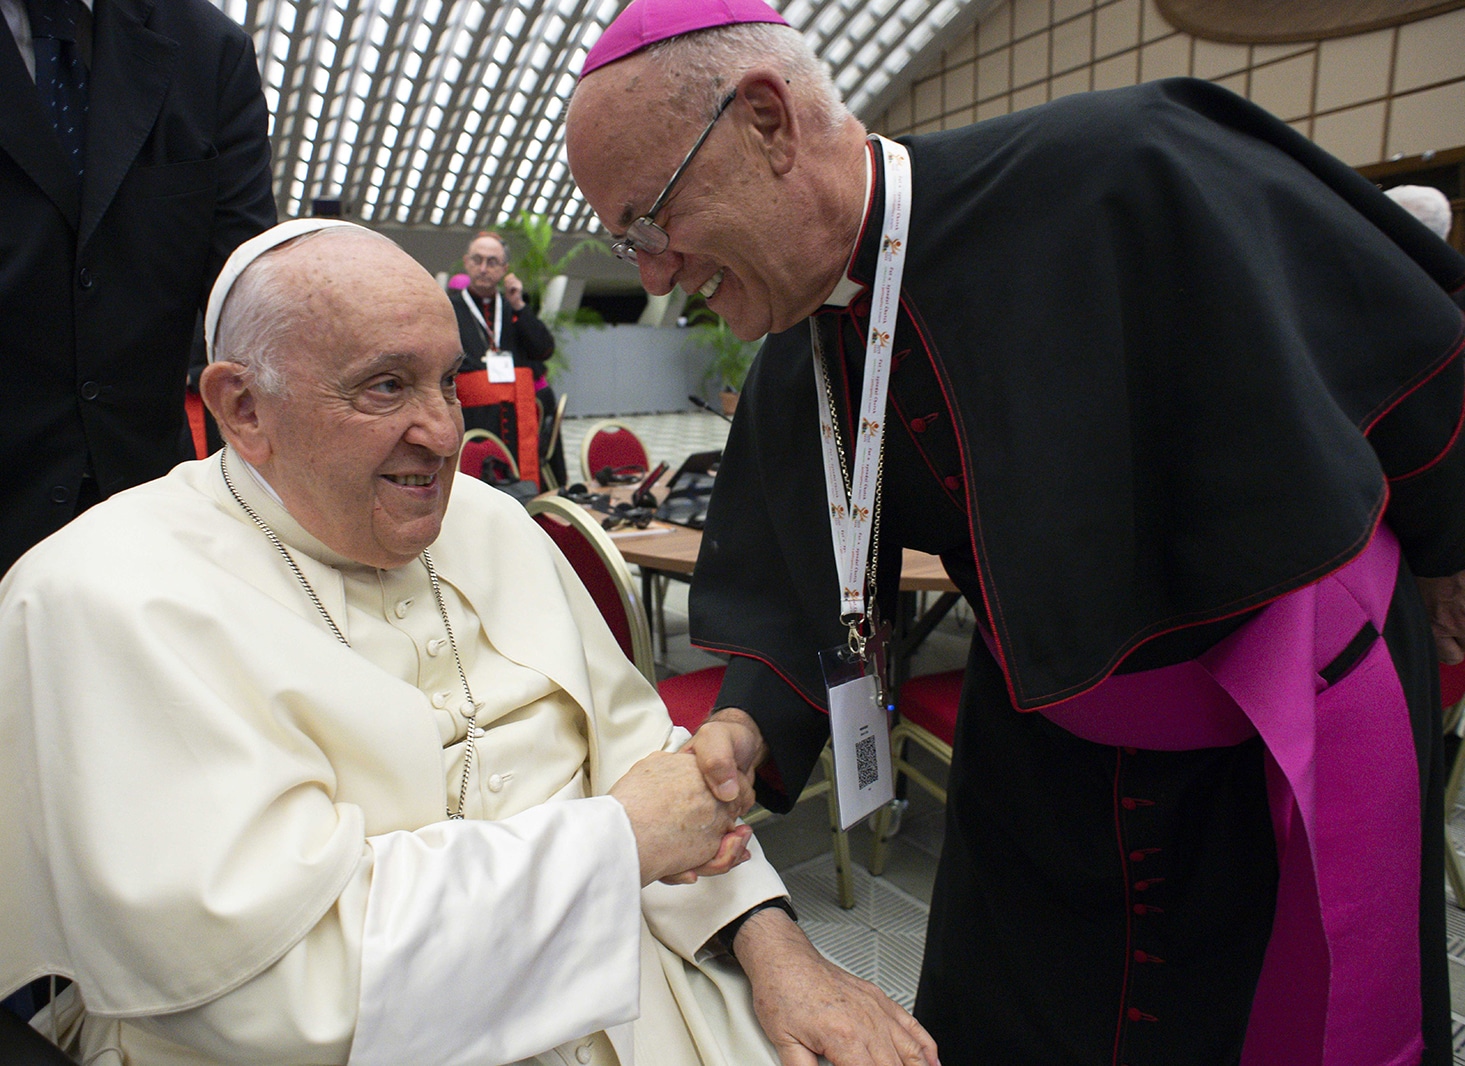 Testimonies give insight into how Synod on Synodality can realize